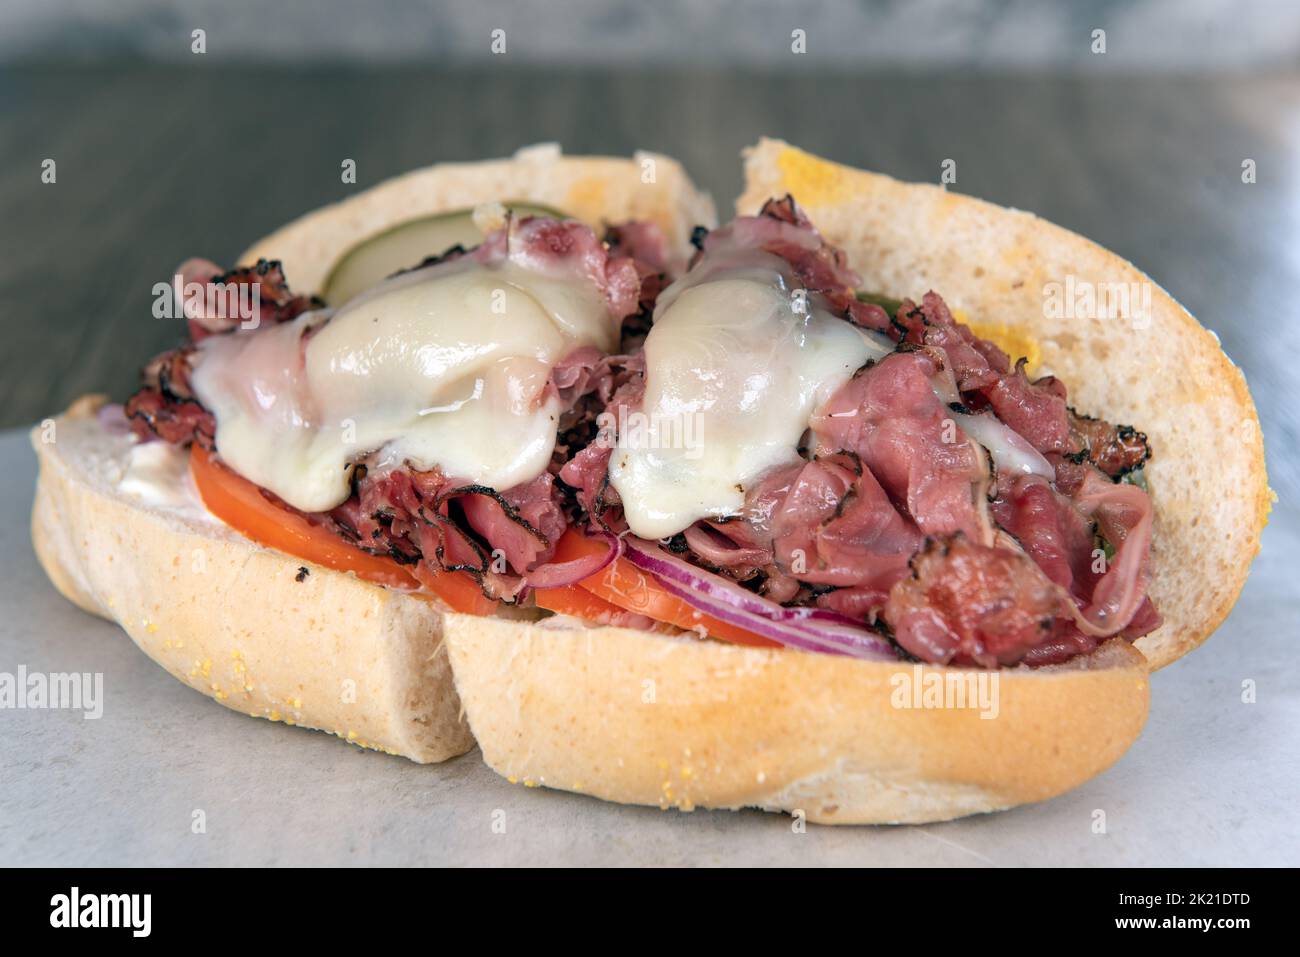 Lunch is served with a loaded pastrami sub sandwich overflowing with melted cheese. Stock Photo